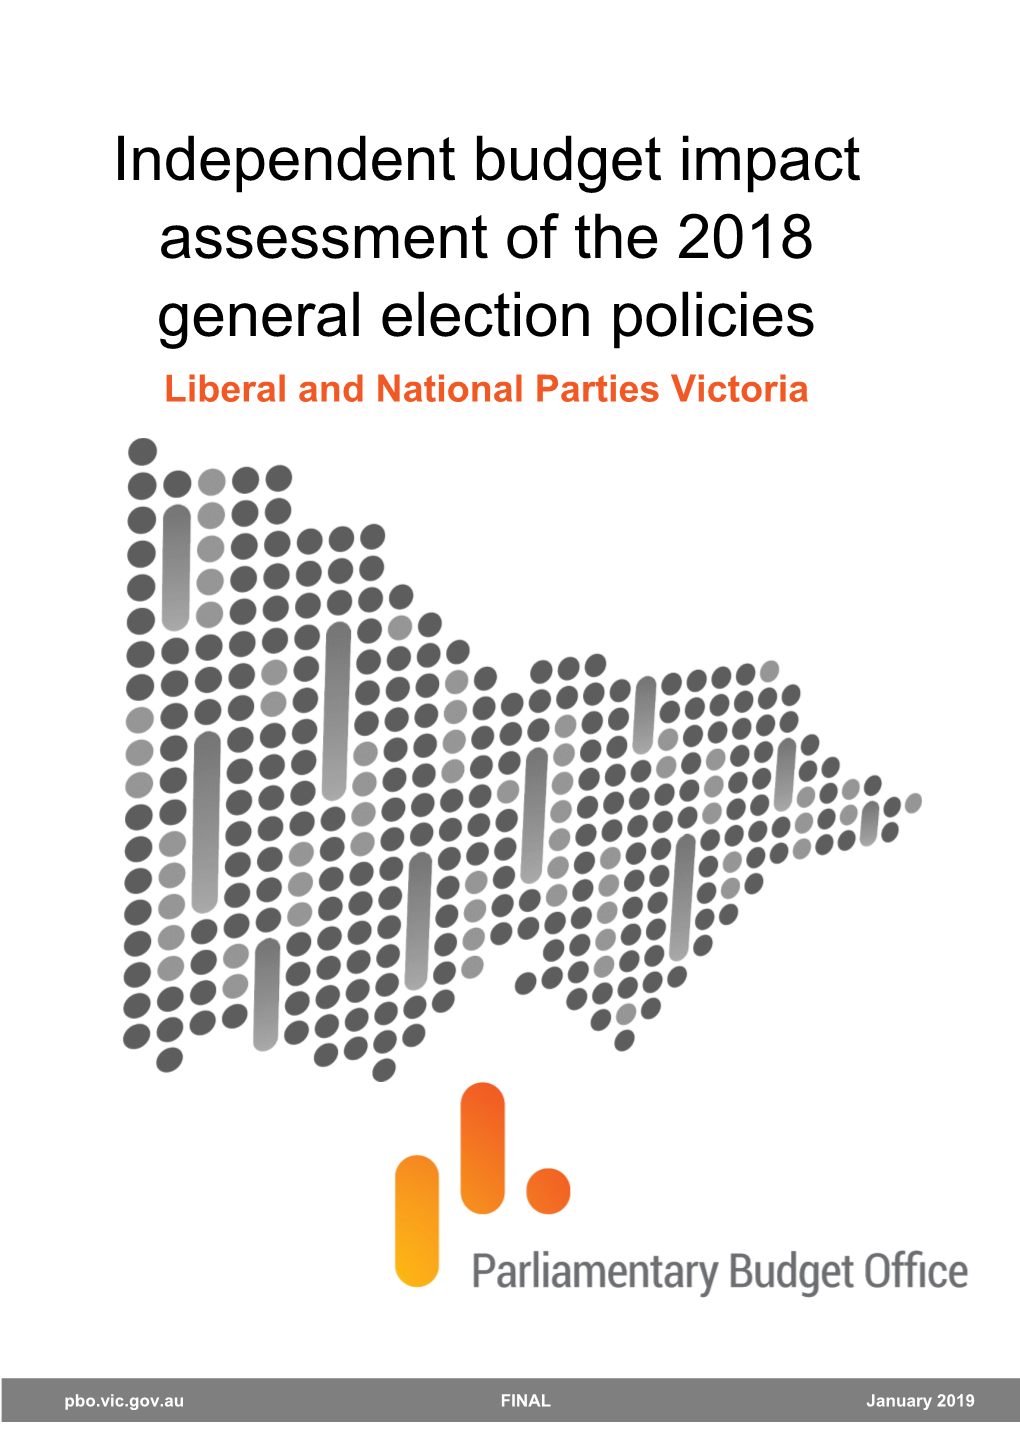 Independent Budget Impact Assessment of the 2018 General Election Policies │ Liberal and National Parties Victoria Available Under CC BY-NC-ND 3.0 Australia